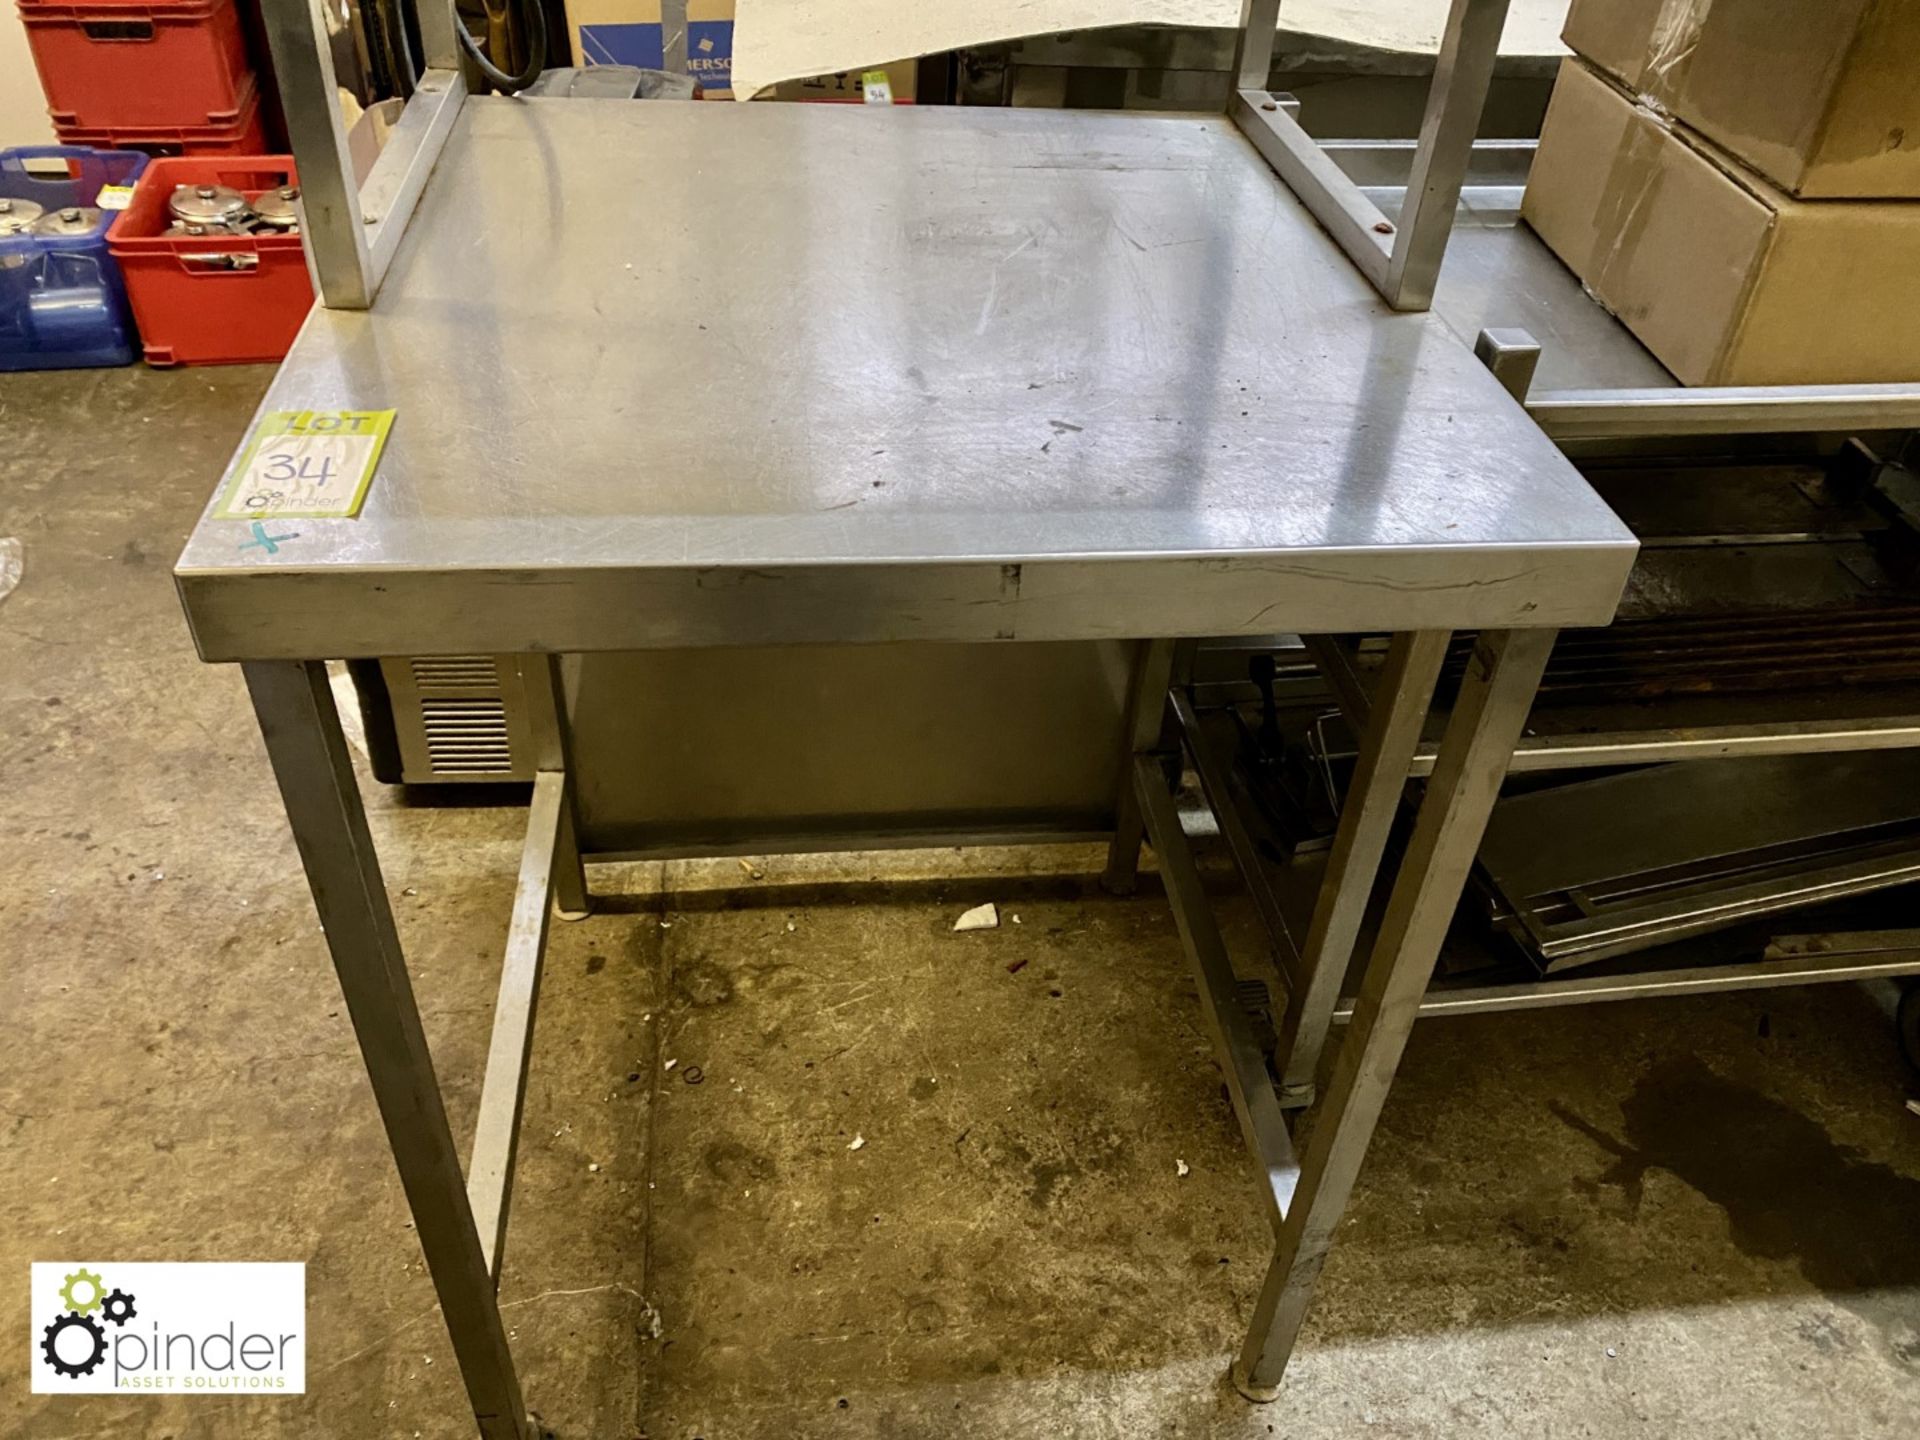 Stainless steel Preparation Table, 695mm x 700mm x 900mm, with additional shelf - Bild 2 aus 2